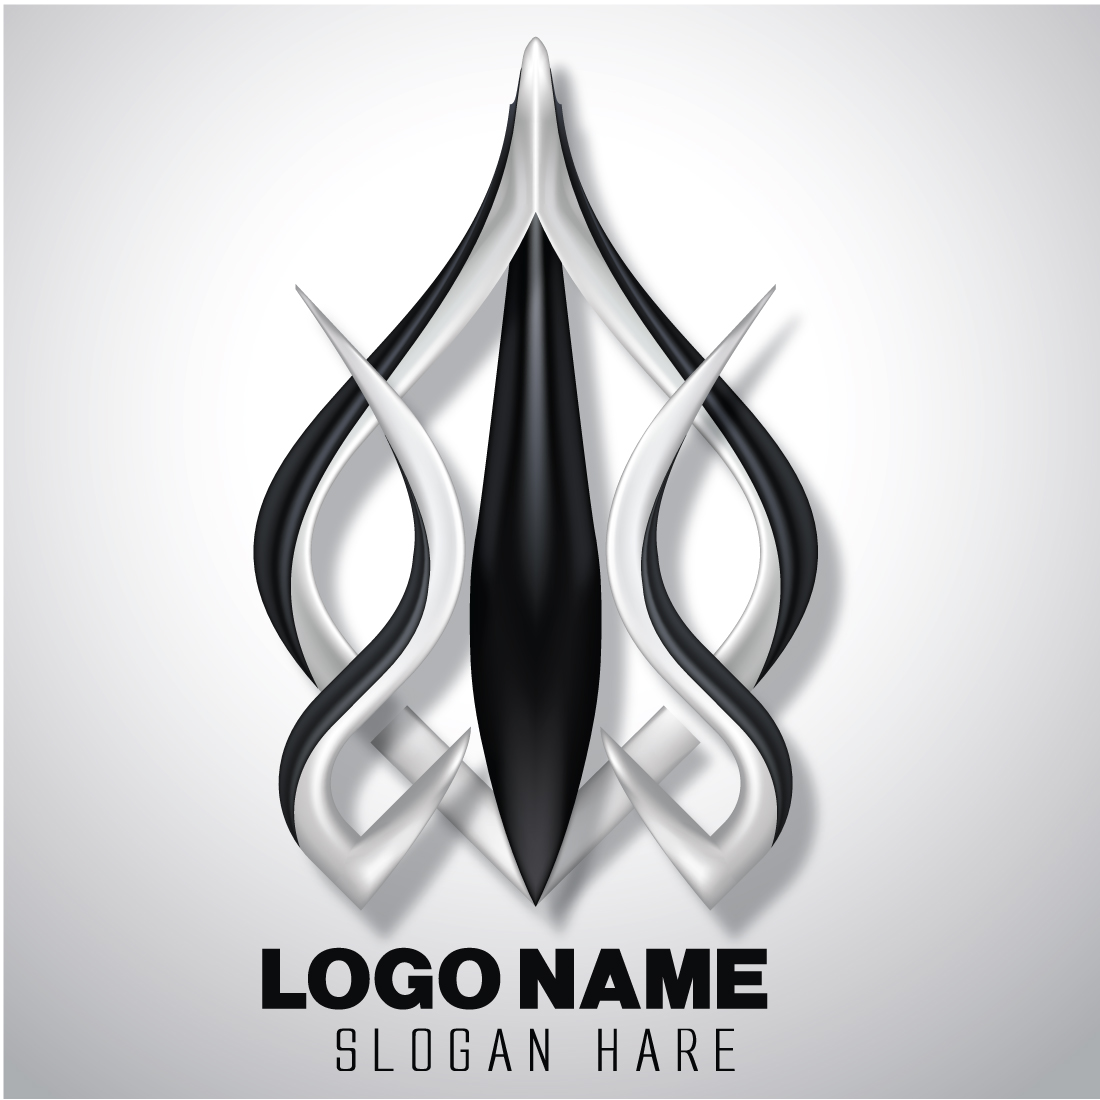 Elegant 3d silver and black auto logo template cover image.